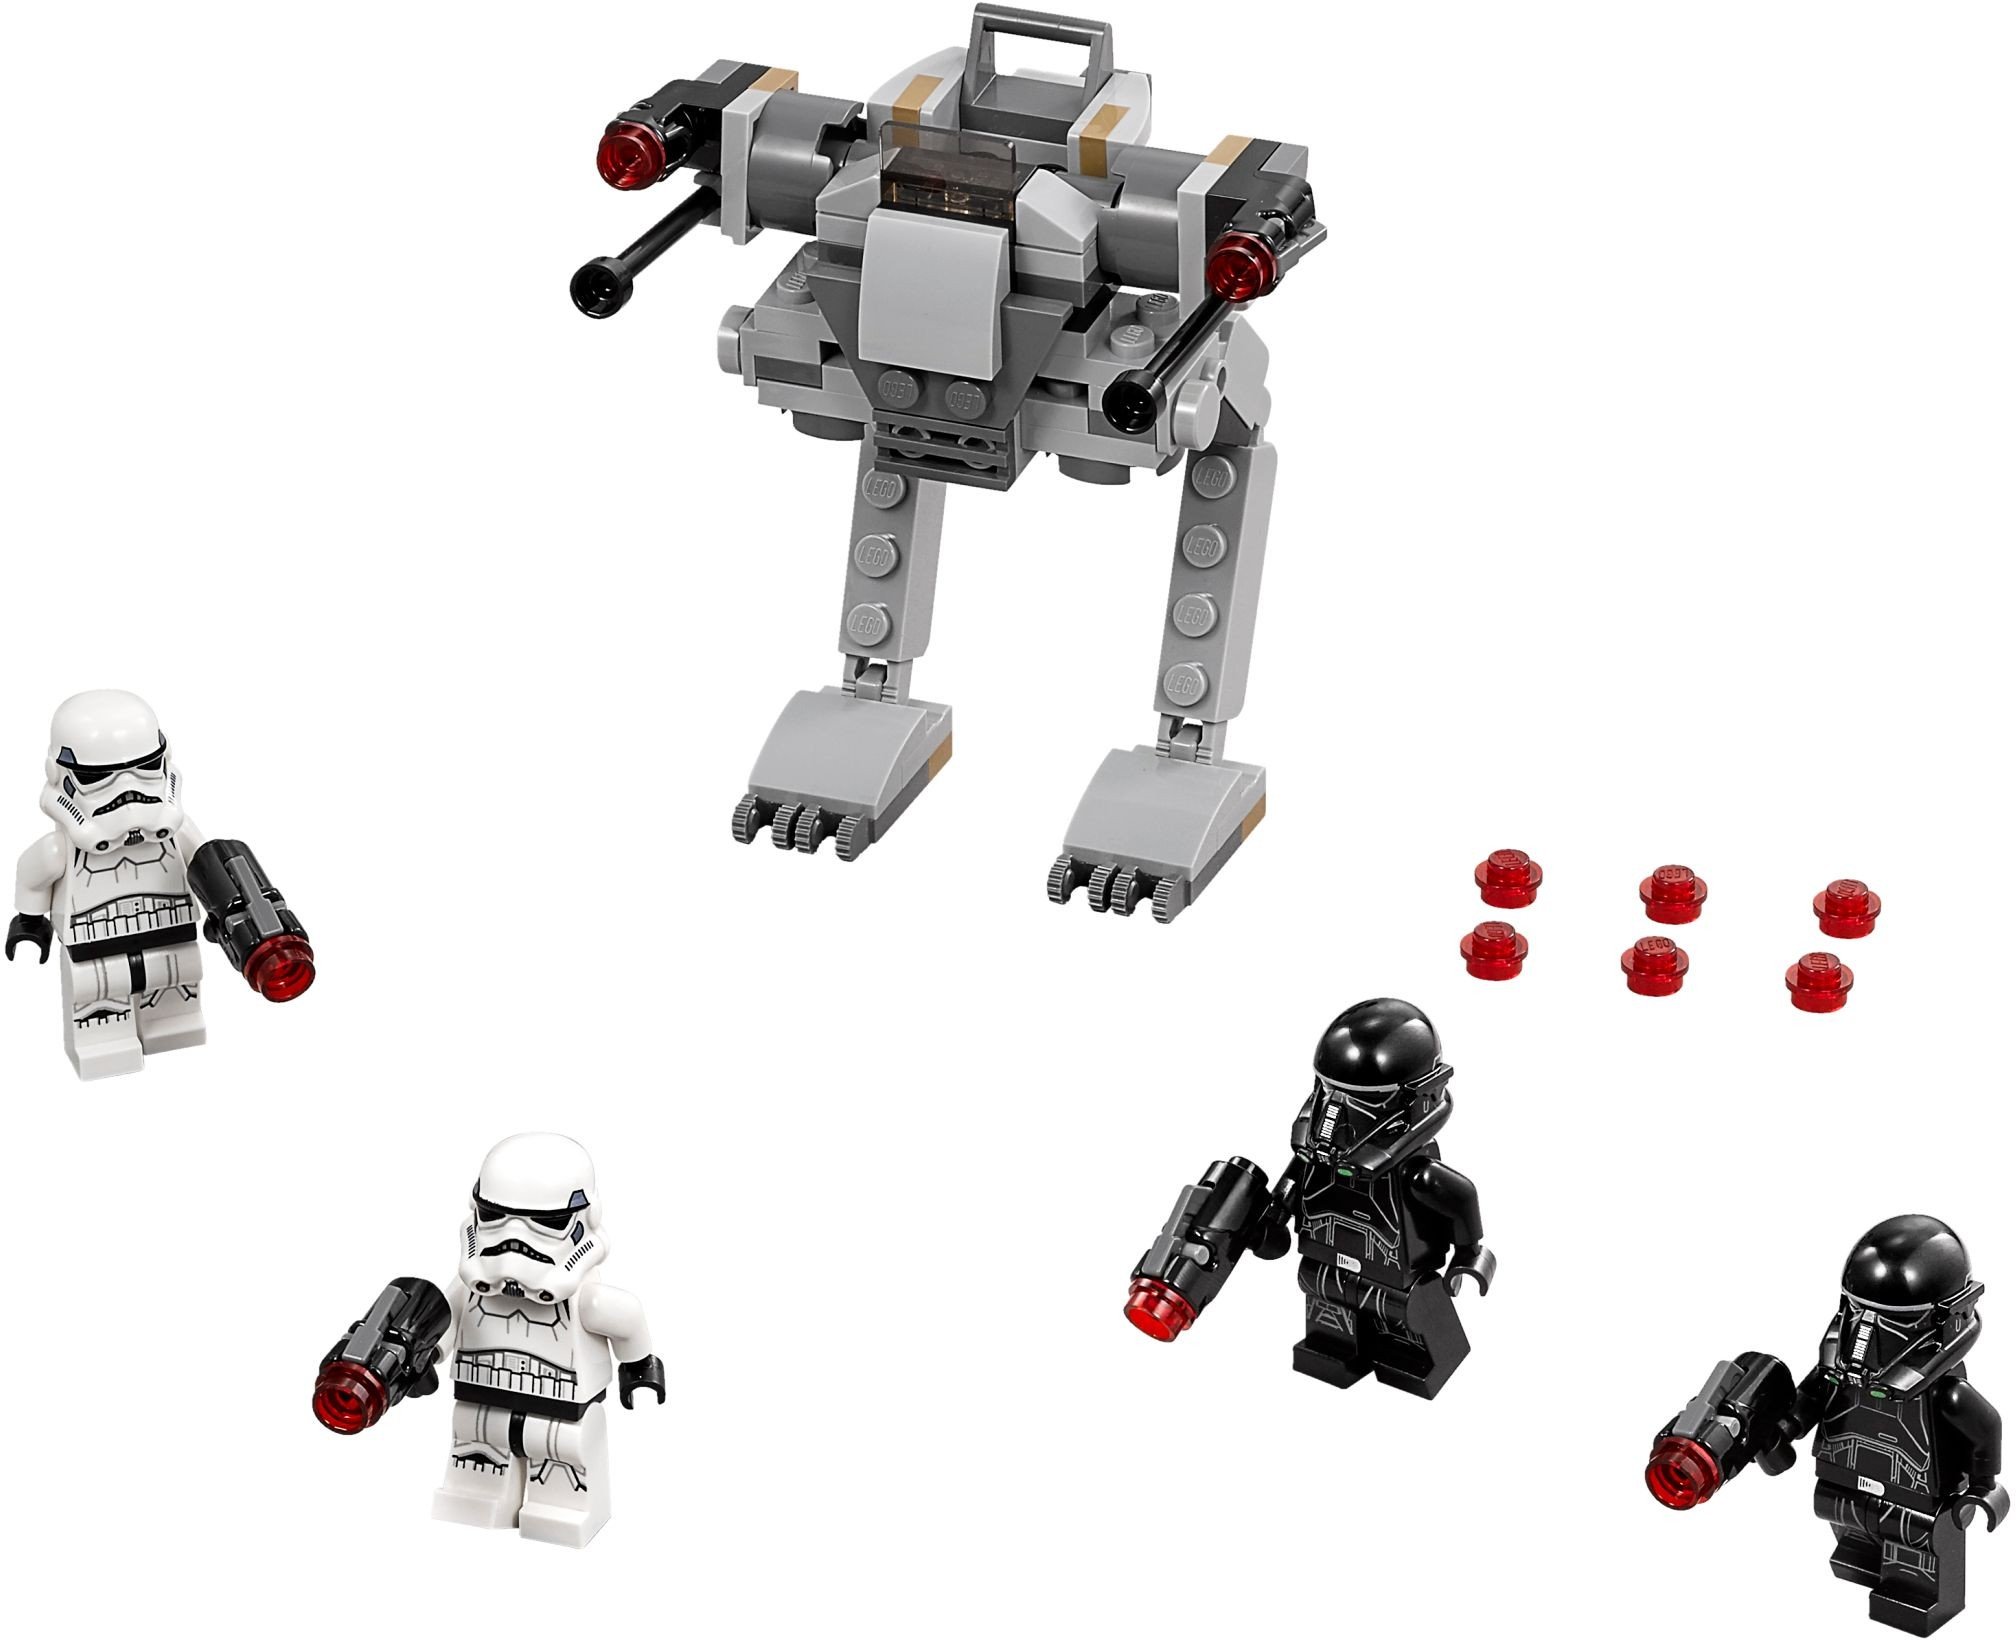 Kaufe LEGO Star Wars - Rouge one - Imperial Trooper Battle Pack (75165)